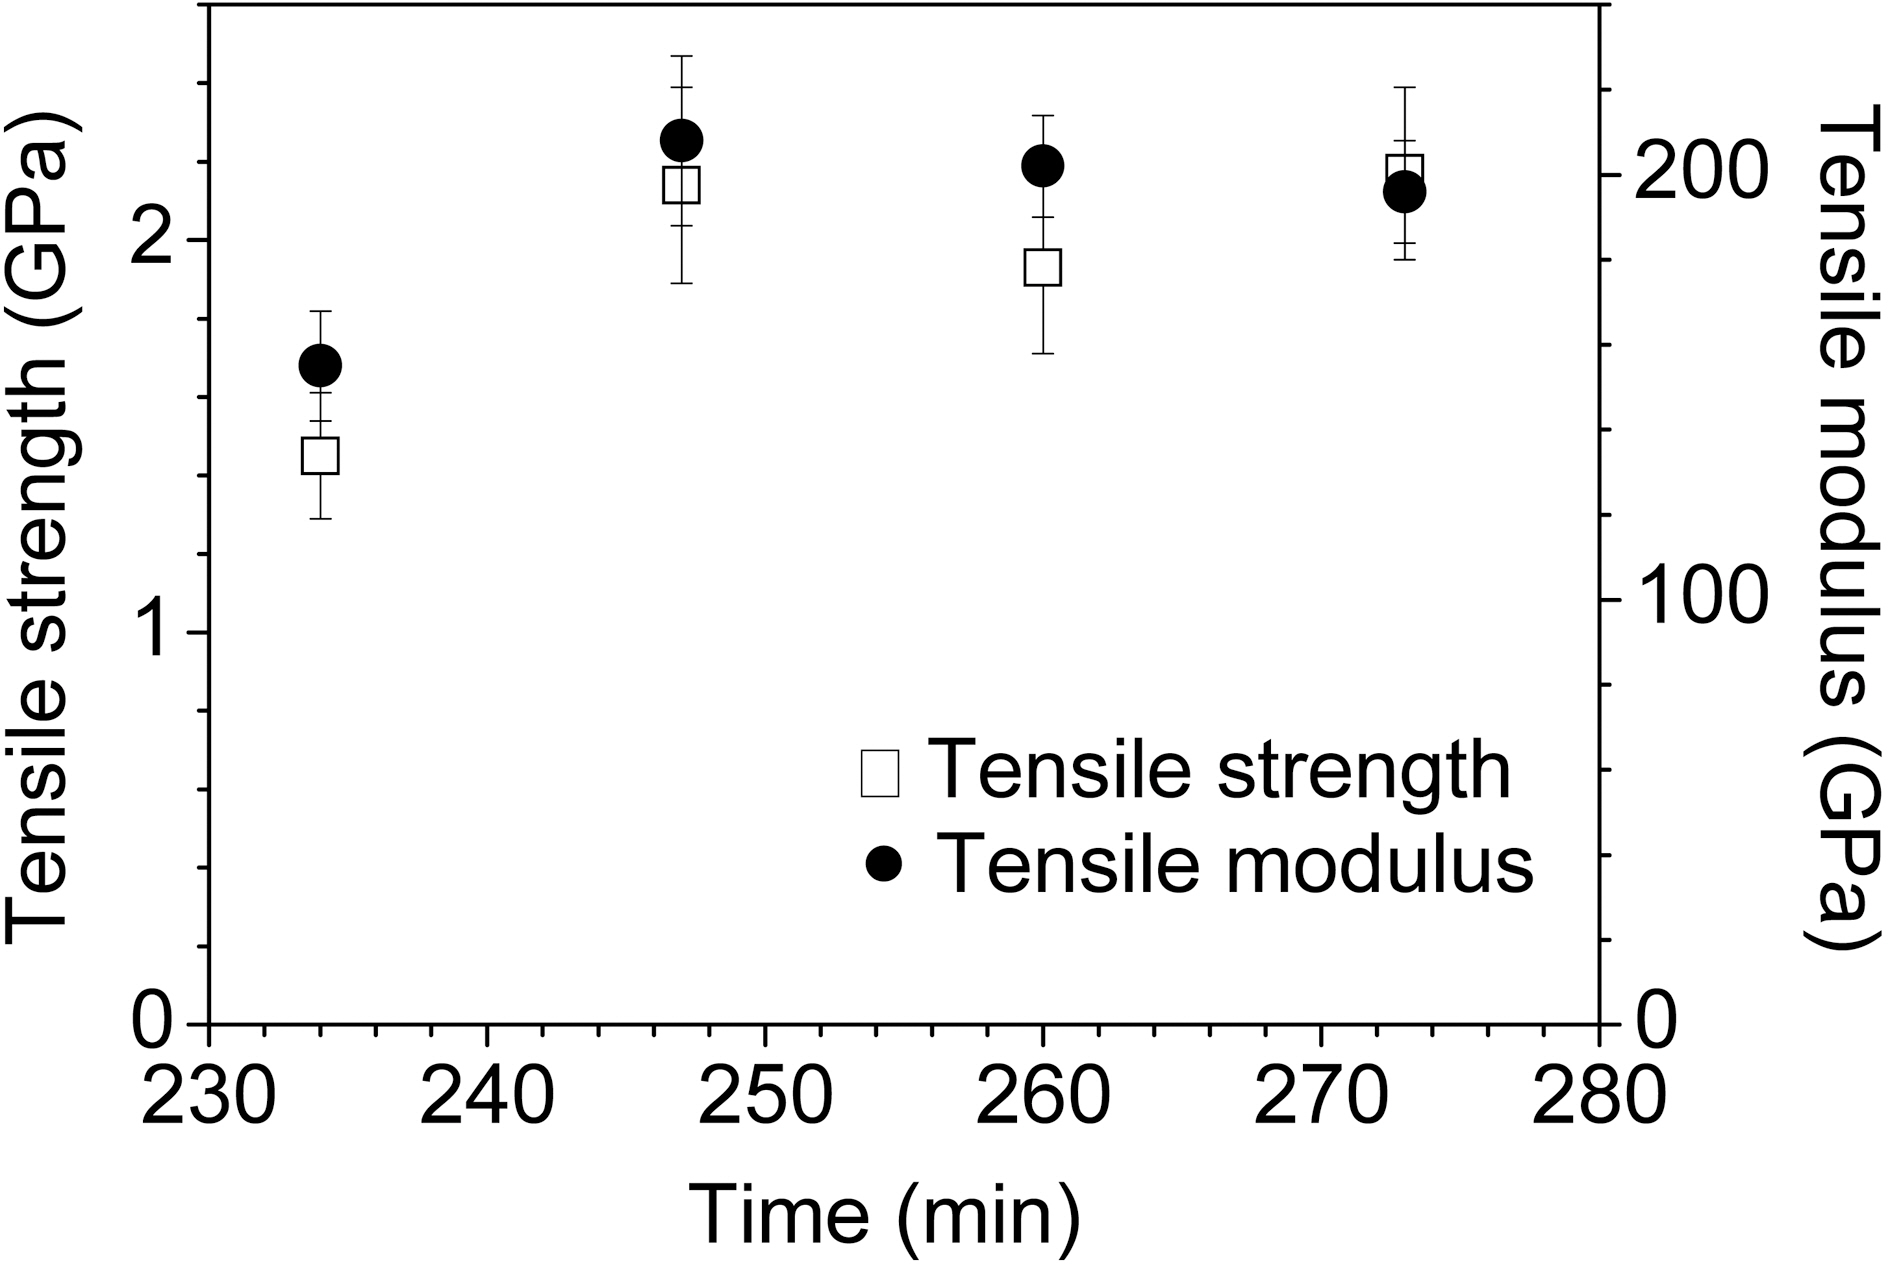 Tensile properties of carbon fibers as a function of stabilizationtemperature profile for 65 min. The abscissa axis representsstabilization temperature of the last column.